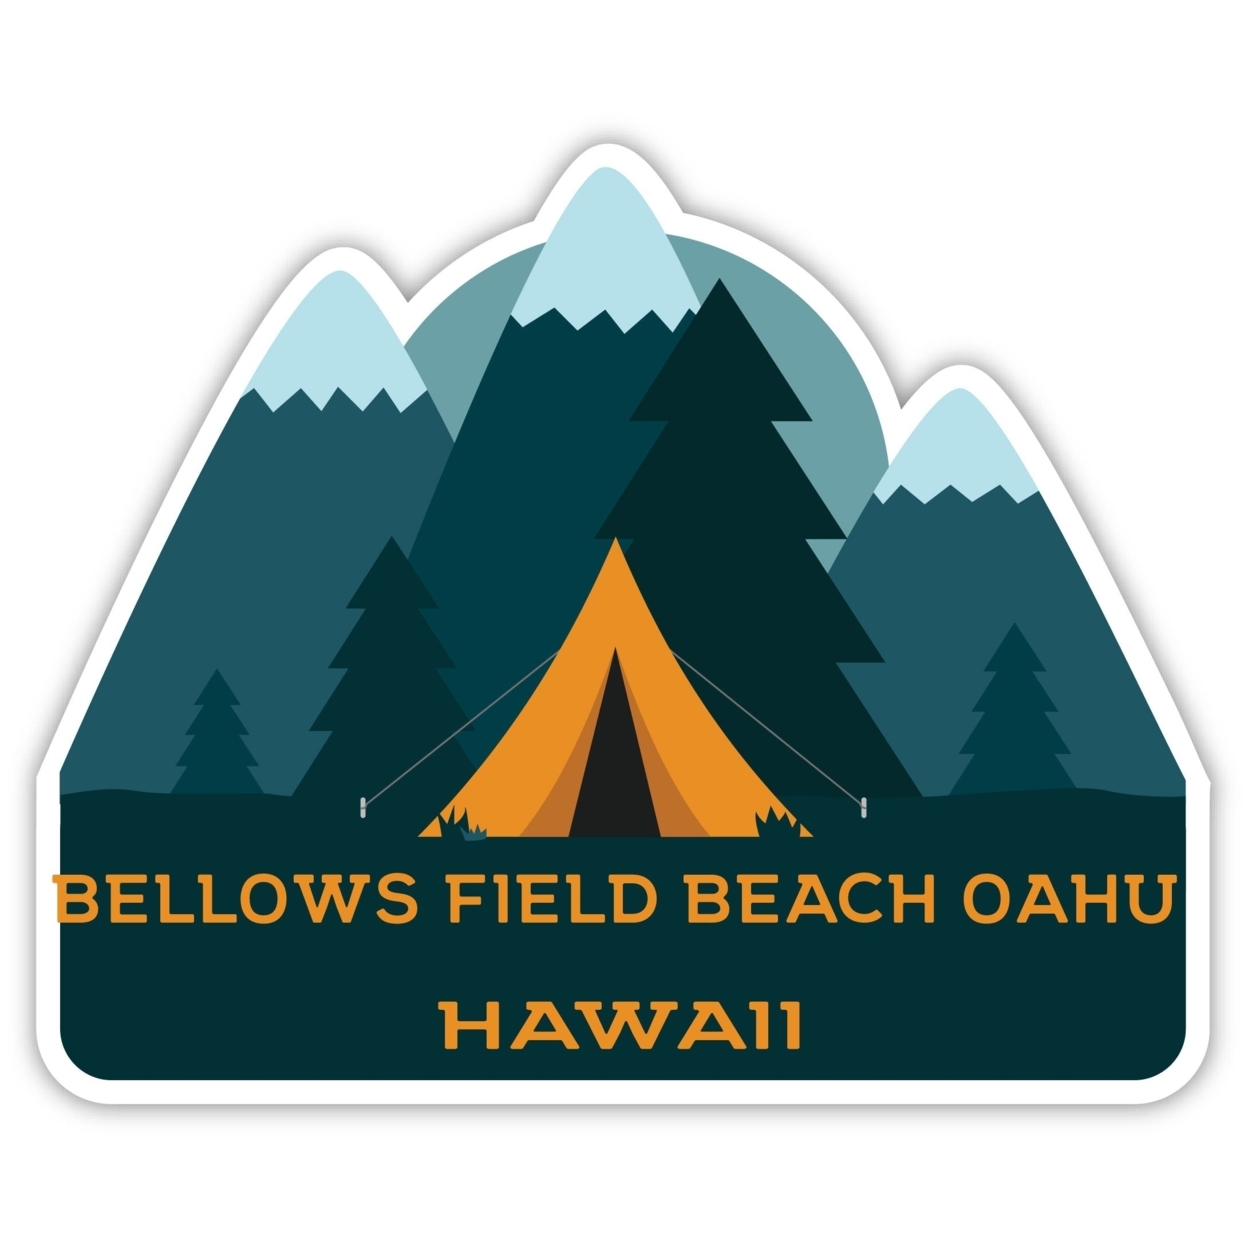 Bellows Field Beach Oahu Hawaii Souvenir Decorative Stickers (Choose Theme And Size) - 4-Pack, 4-Inch, Tent